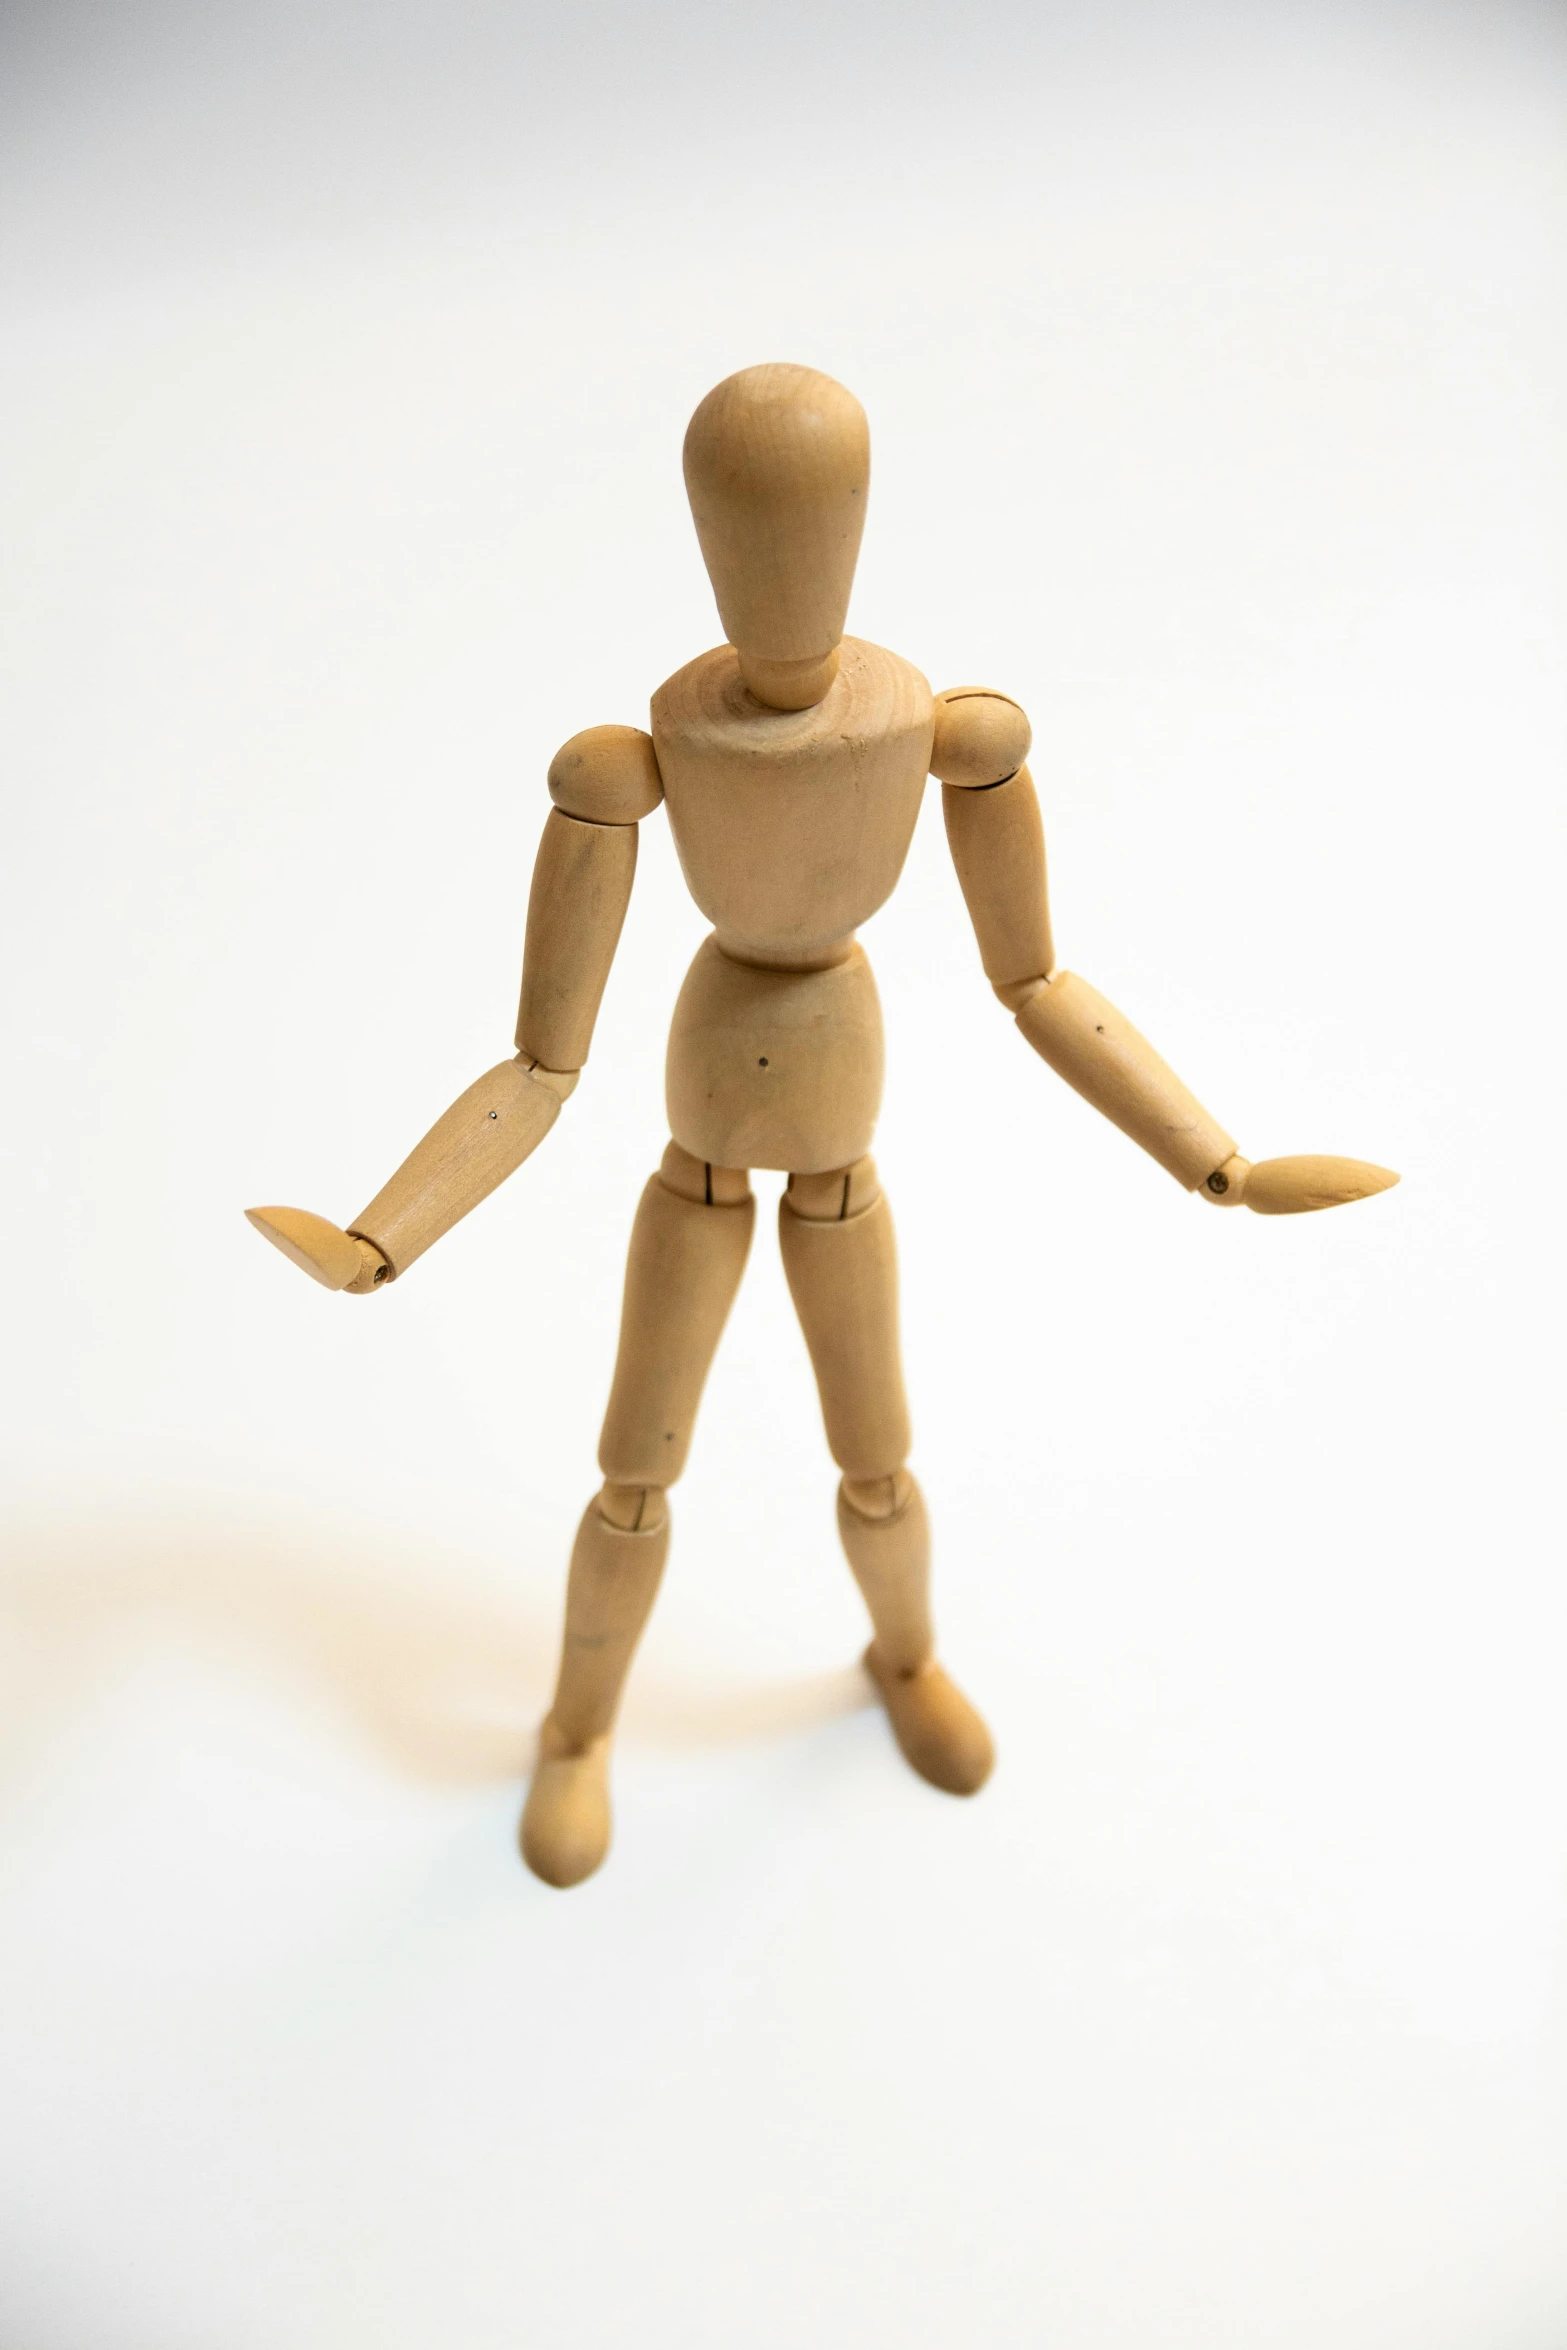 a wooden mannequin figure stands with hands outstretched